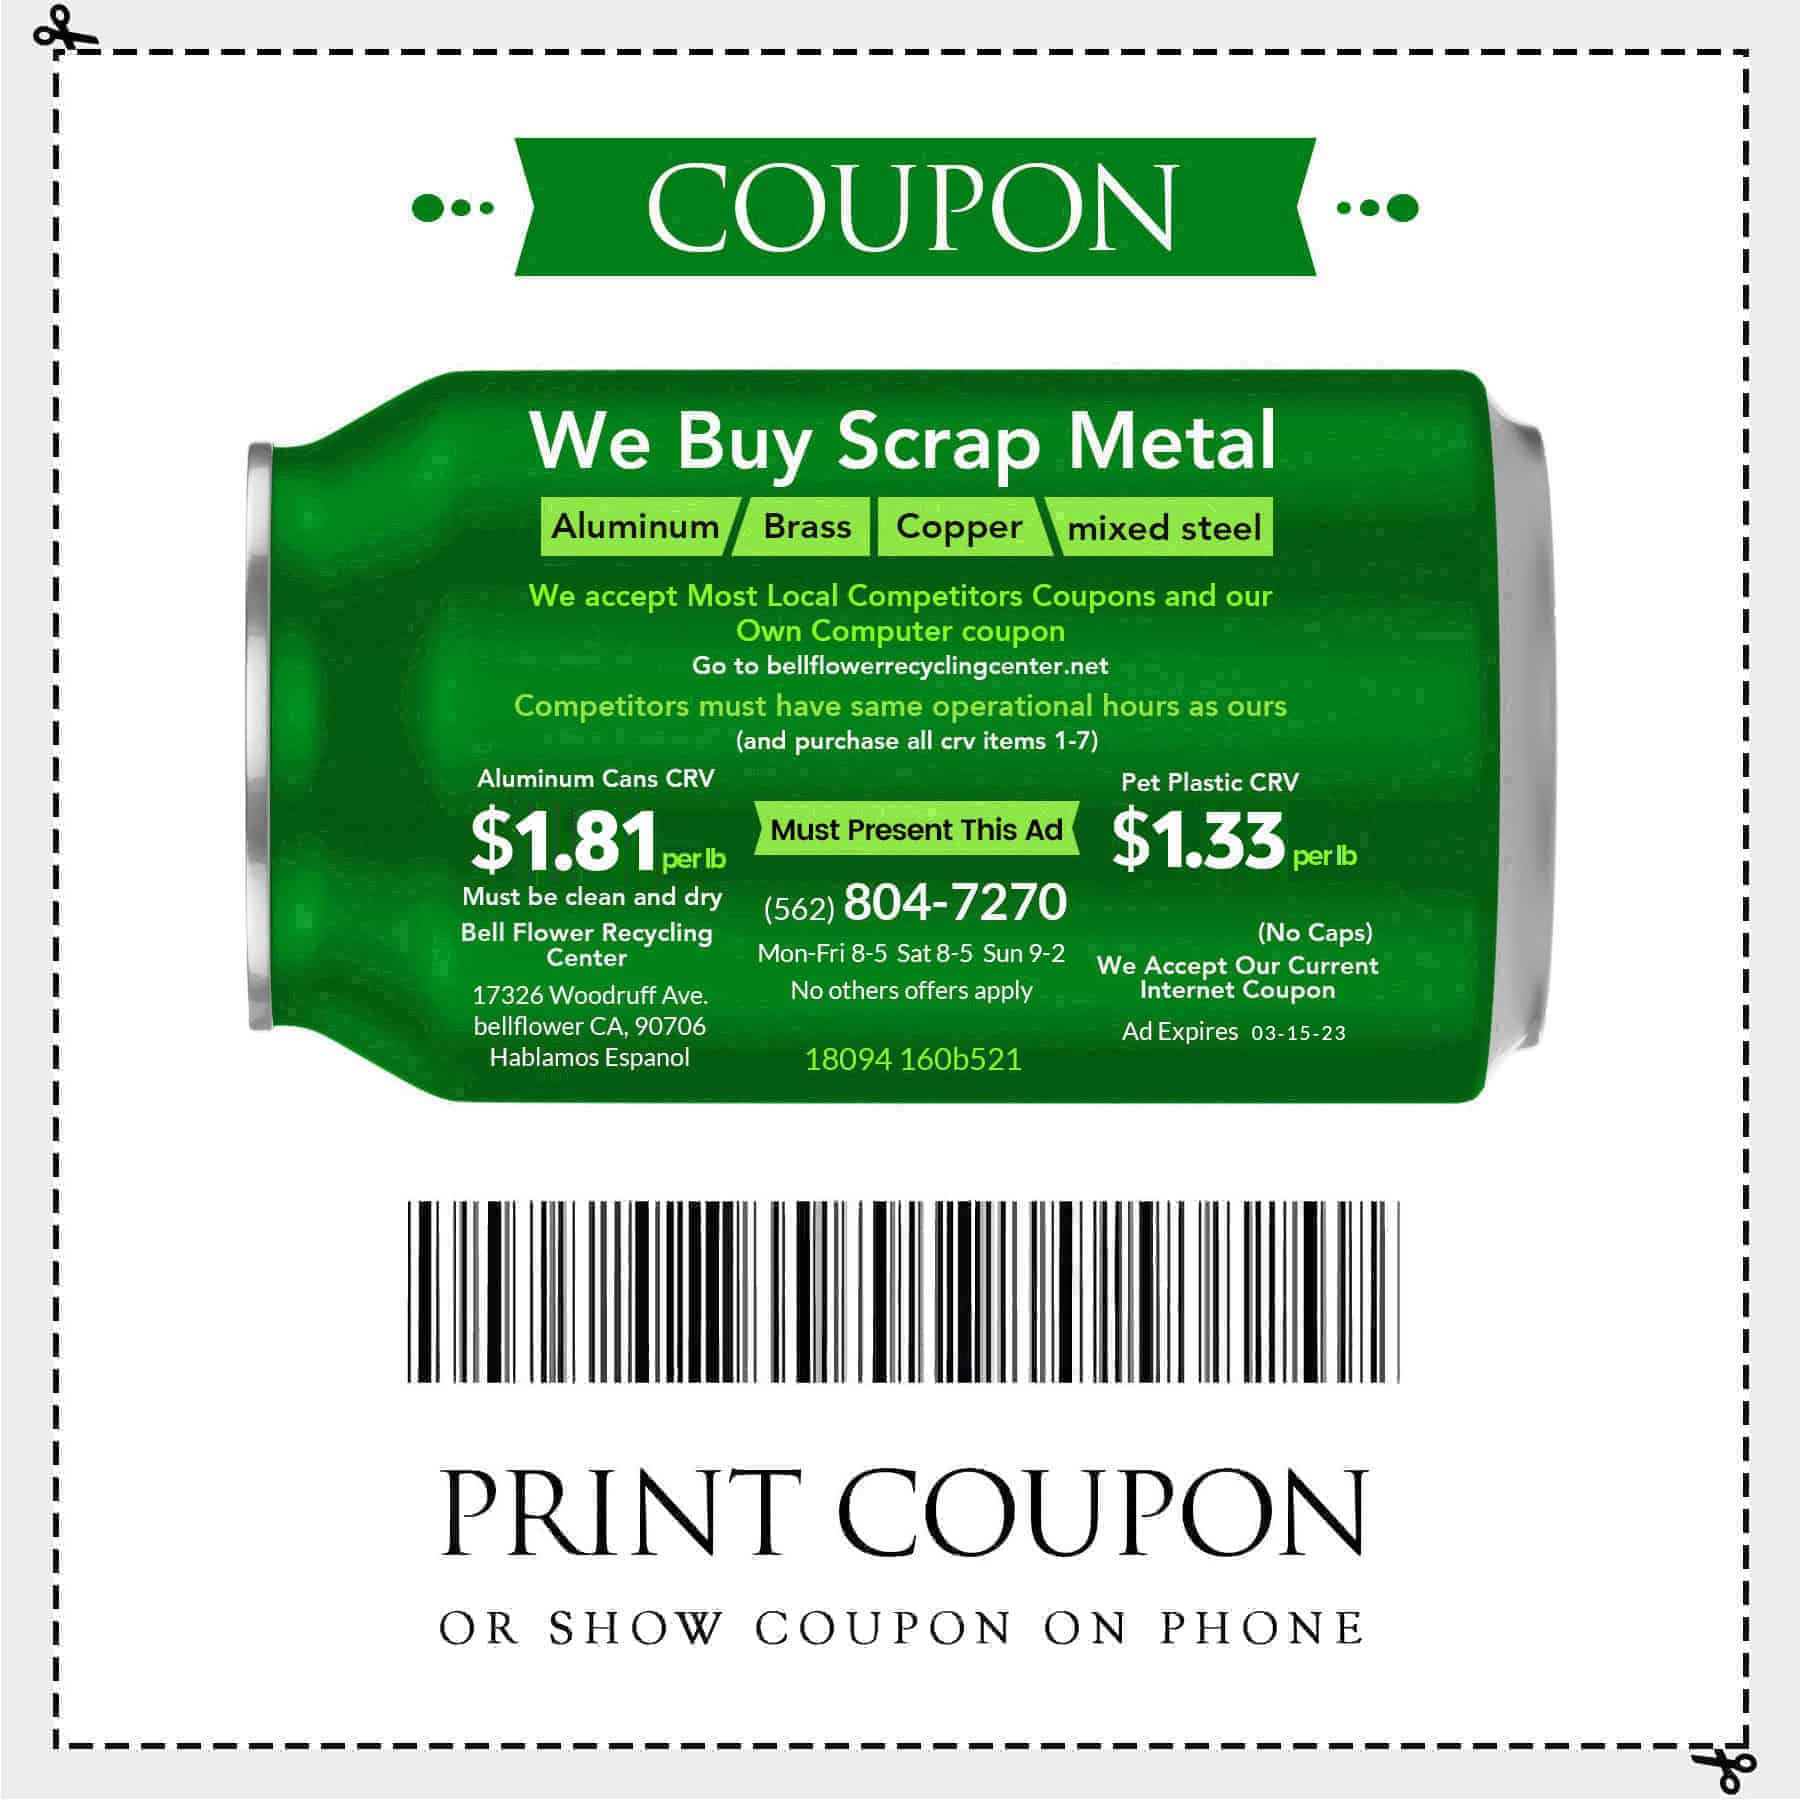 We buy scrap metal Aluminum, Brass, Copper, Mixed steel. We accept most local competitors coupons and our own computer coupon. Competitors must have same operational hours as ours (and purchase all crv items 1-7). One Must present this add. Aluminum Cans CRV $1.81 per lb and Pet Plastic CRV $1.33 per lb.